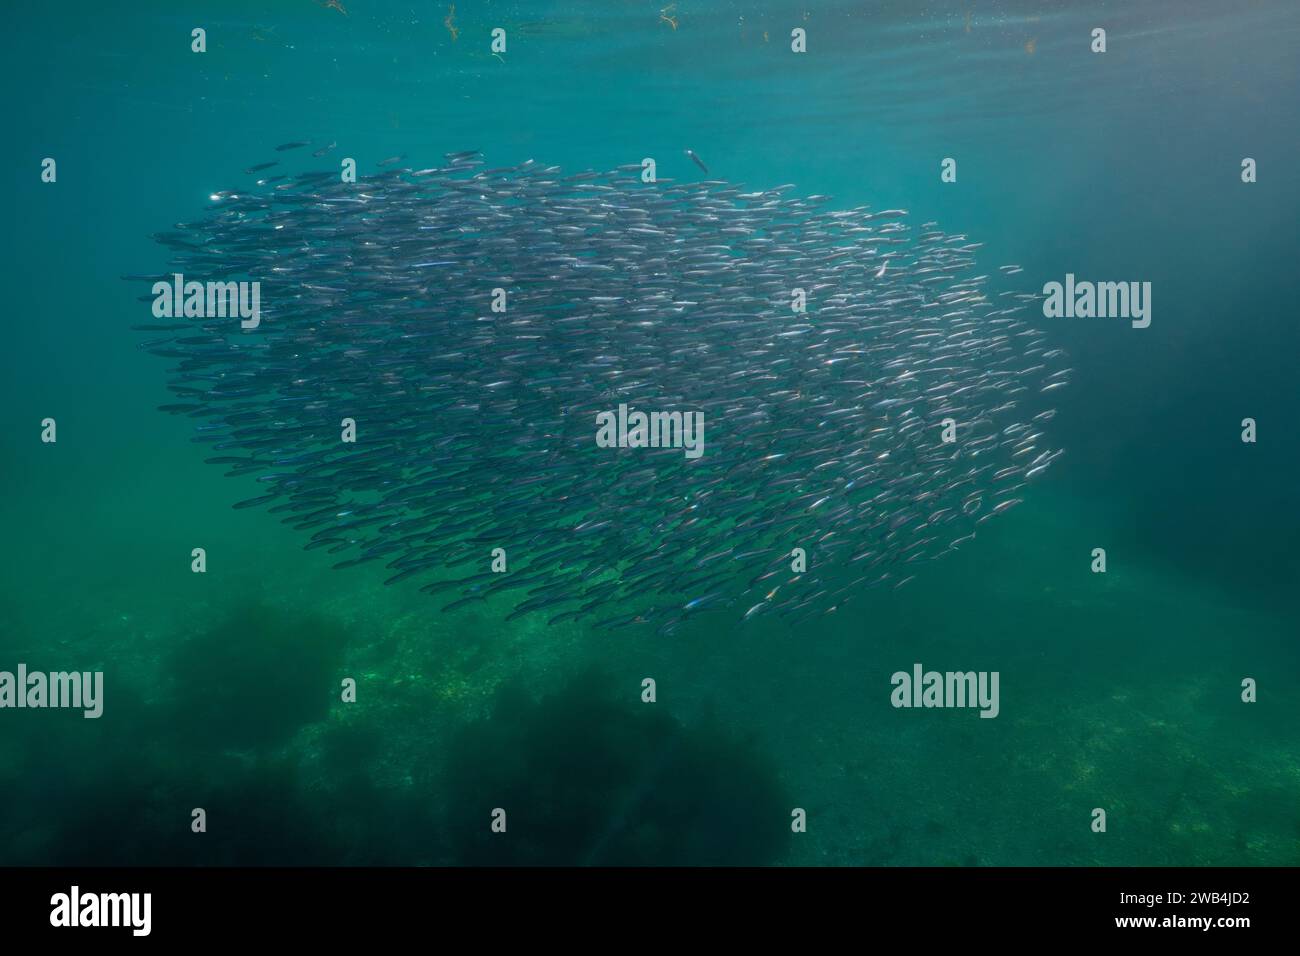 Bait ball of schooling anchovies fish underwater in the Atlantic ocean, European anchovy Engraulis encrasicolus, natural scene, Spain, Galicia Stock Photo